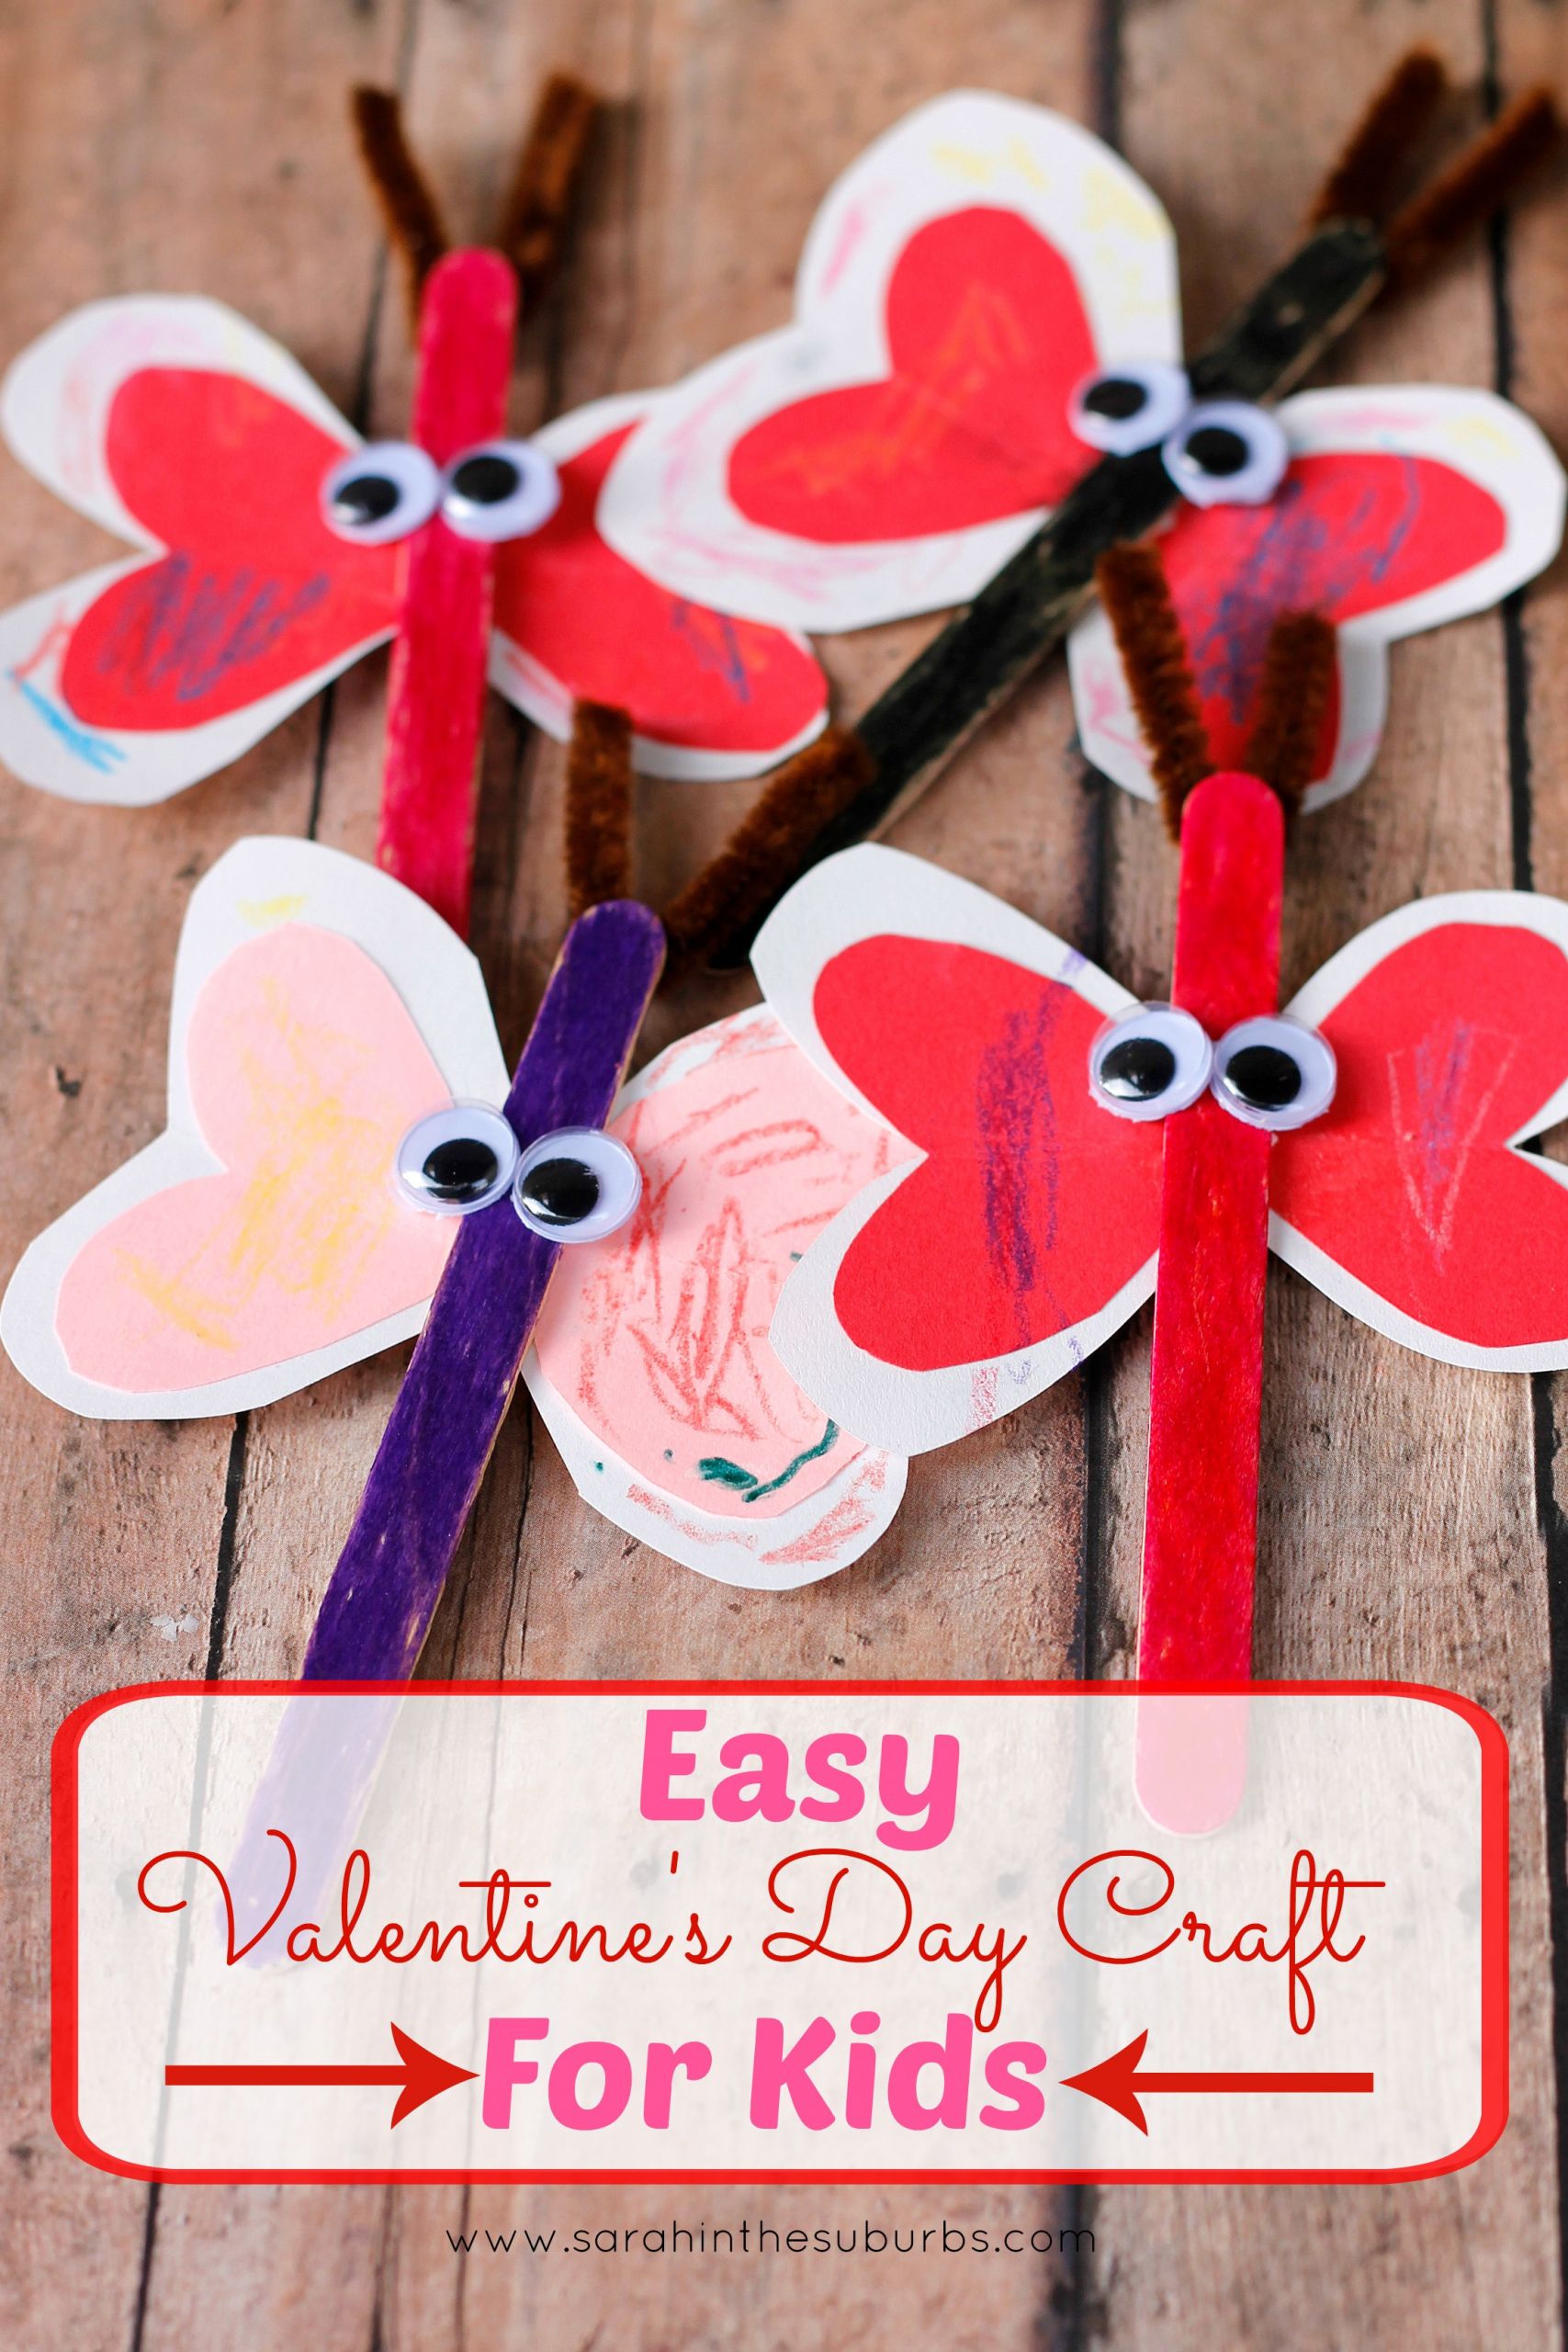 Easy Projects For Toddlers
 Love Bug Valentine s Day Craft for Kids Sarah in the Suburbs